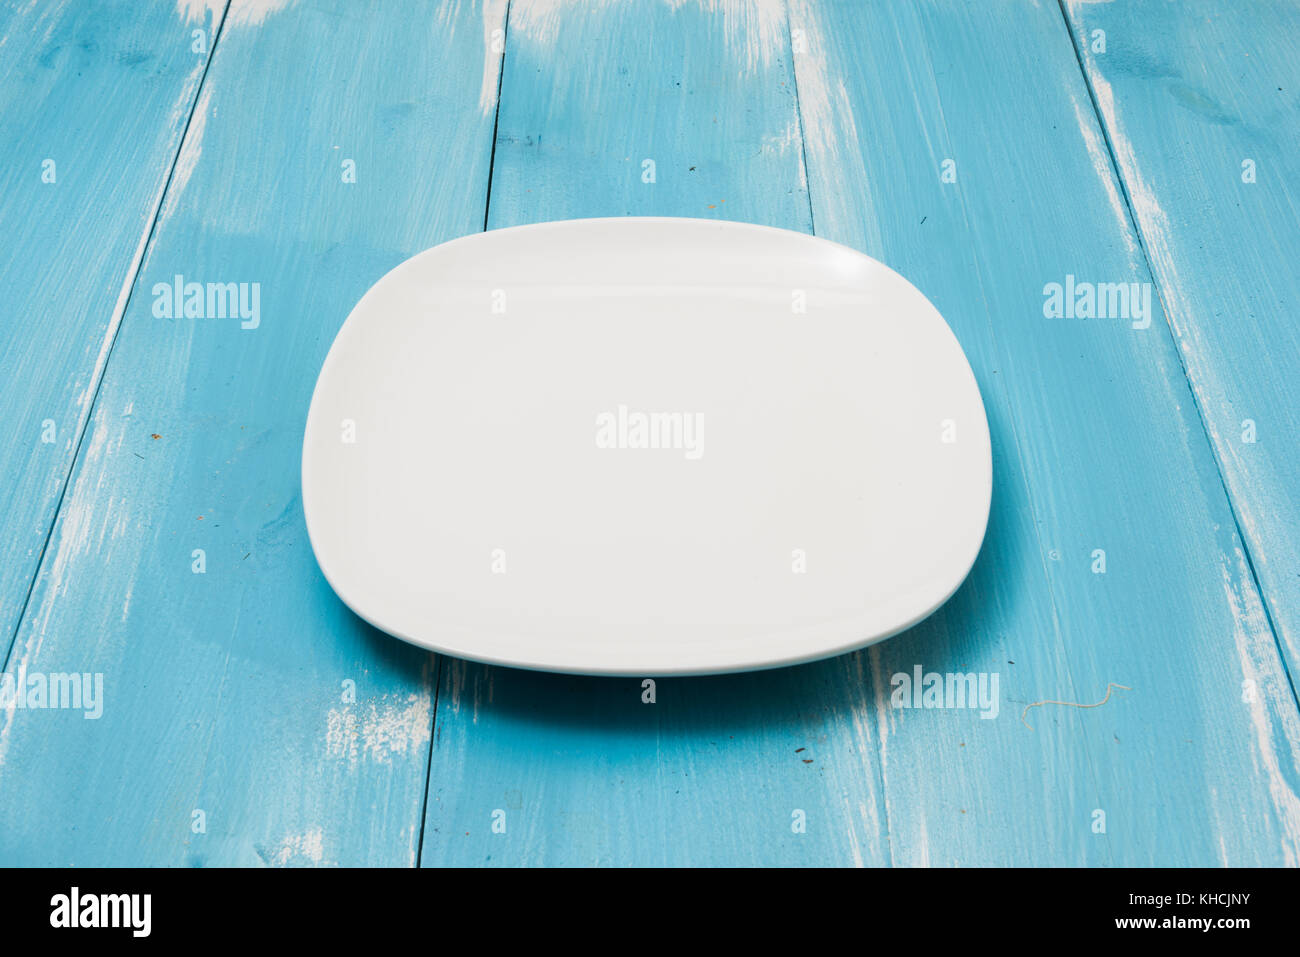 White plate on blue wooden table with perspective side view Stock Photo